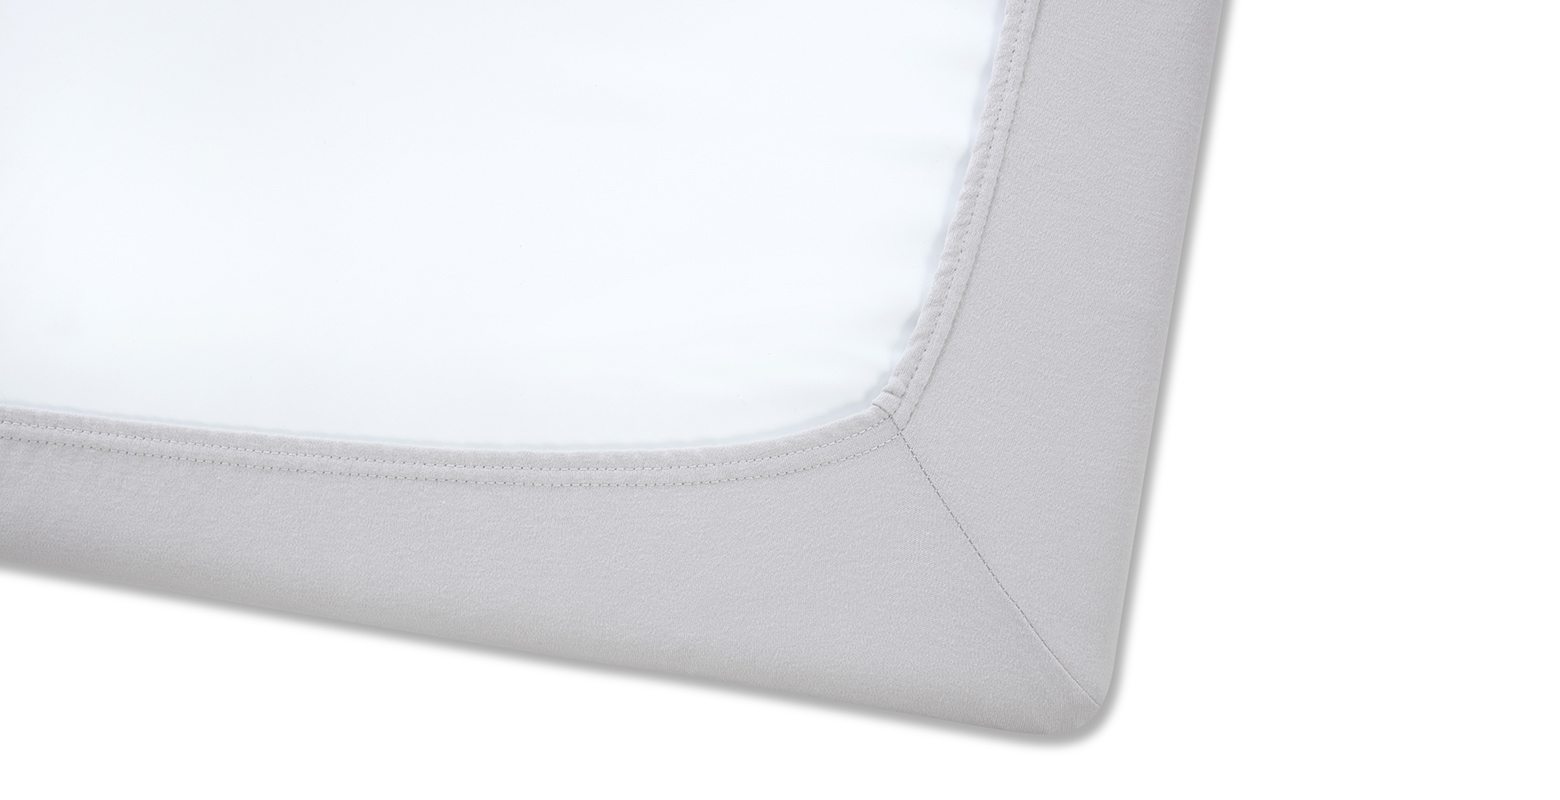 Clair De Lune Fitted Sheet Twin Pack Grey Cotbed